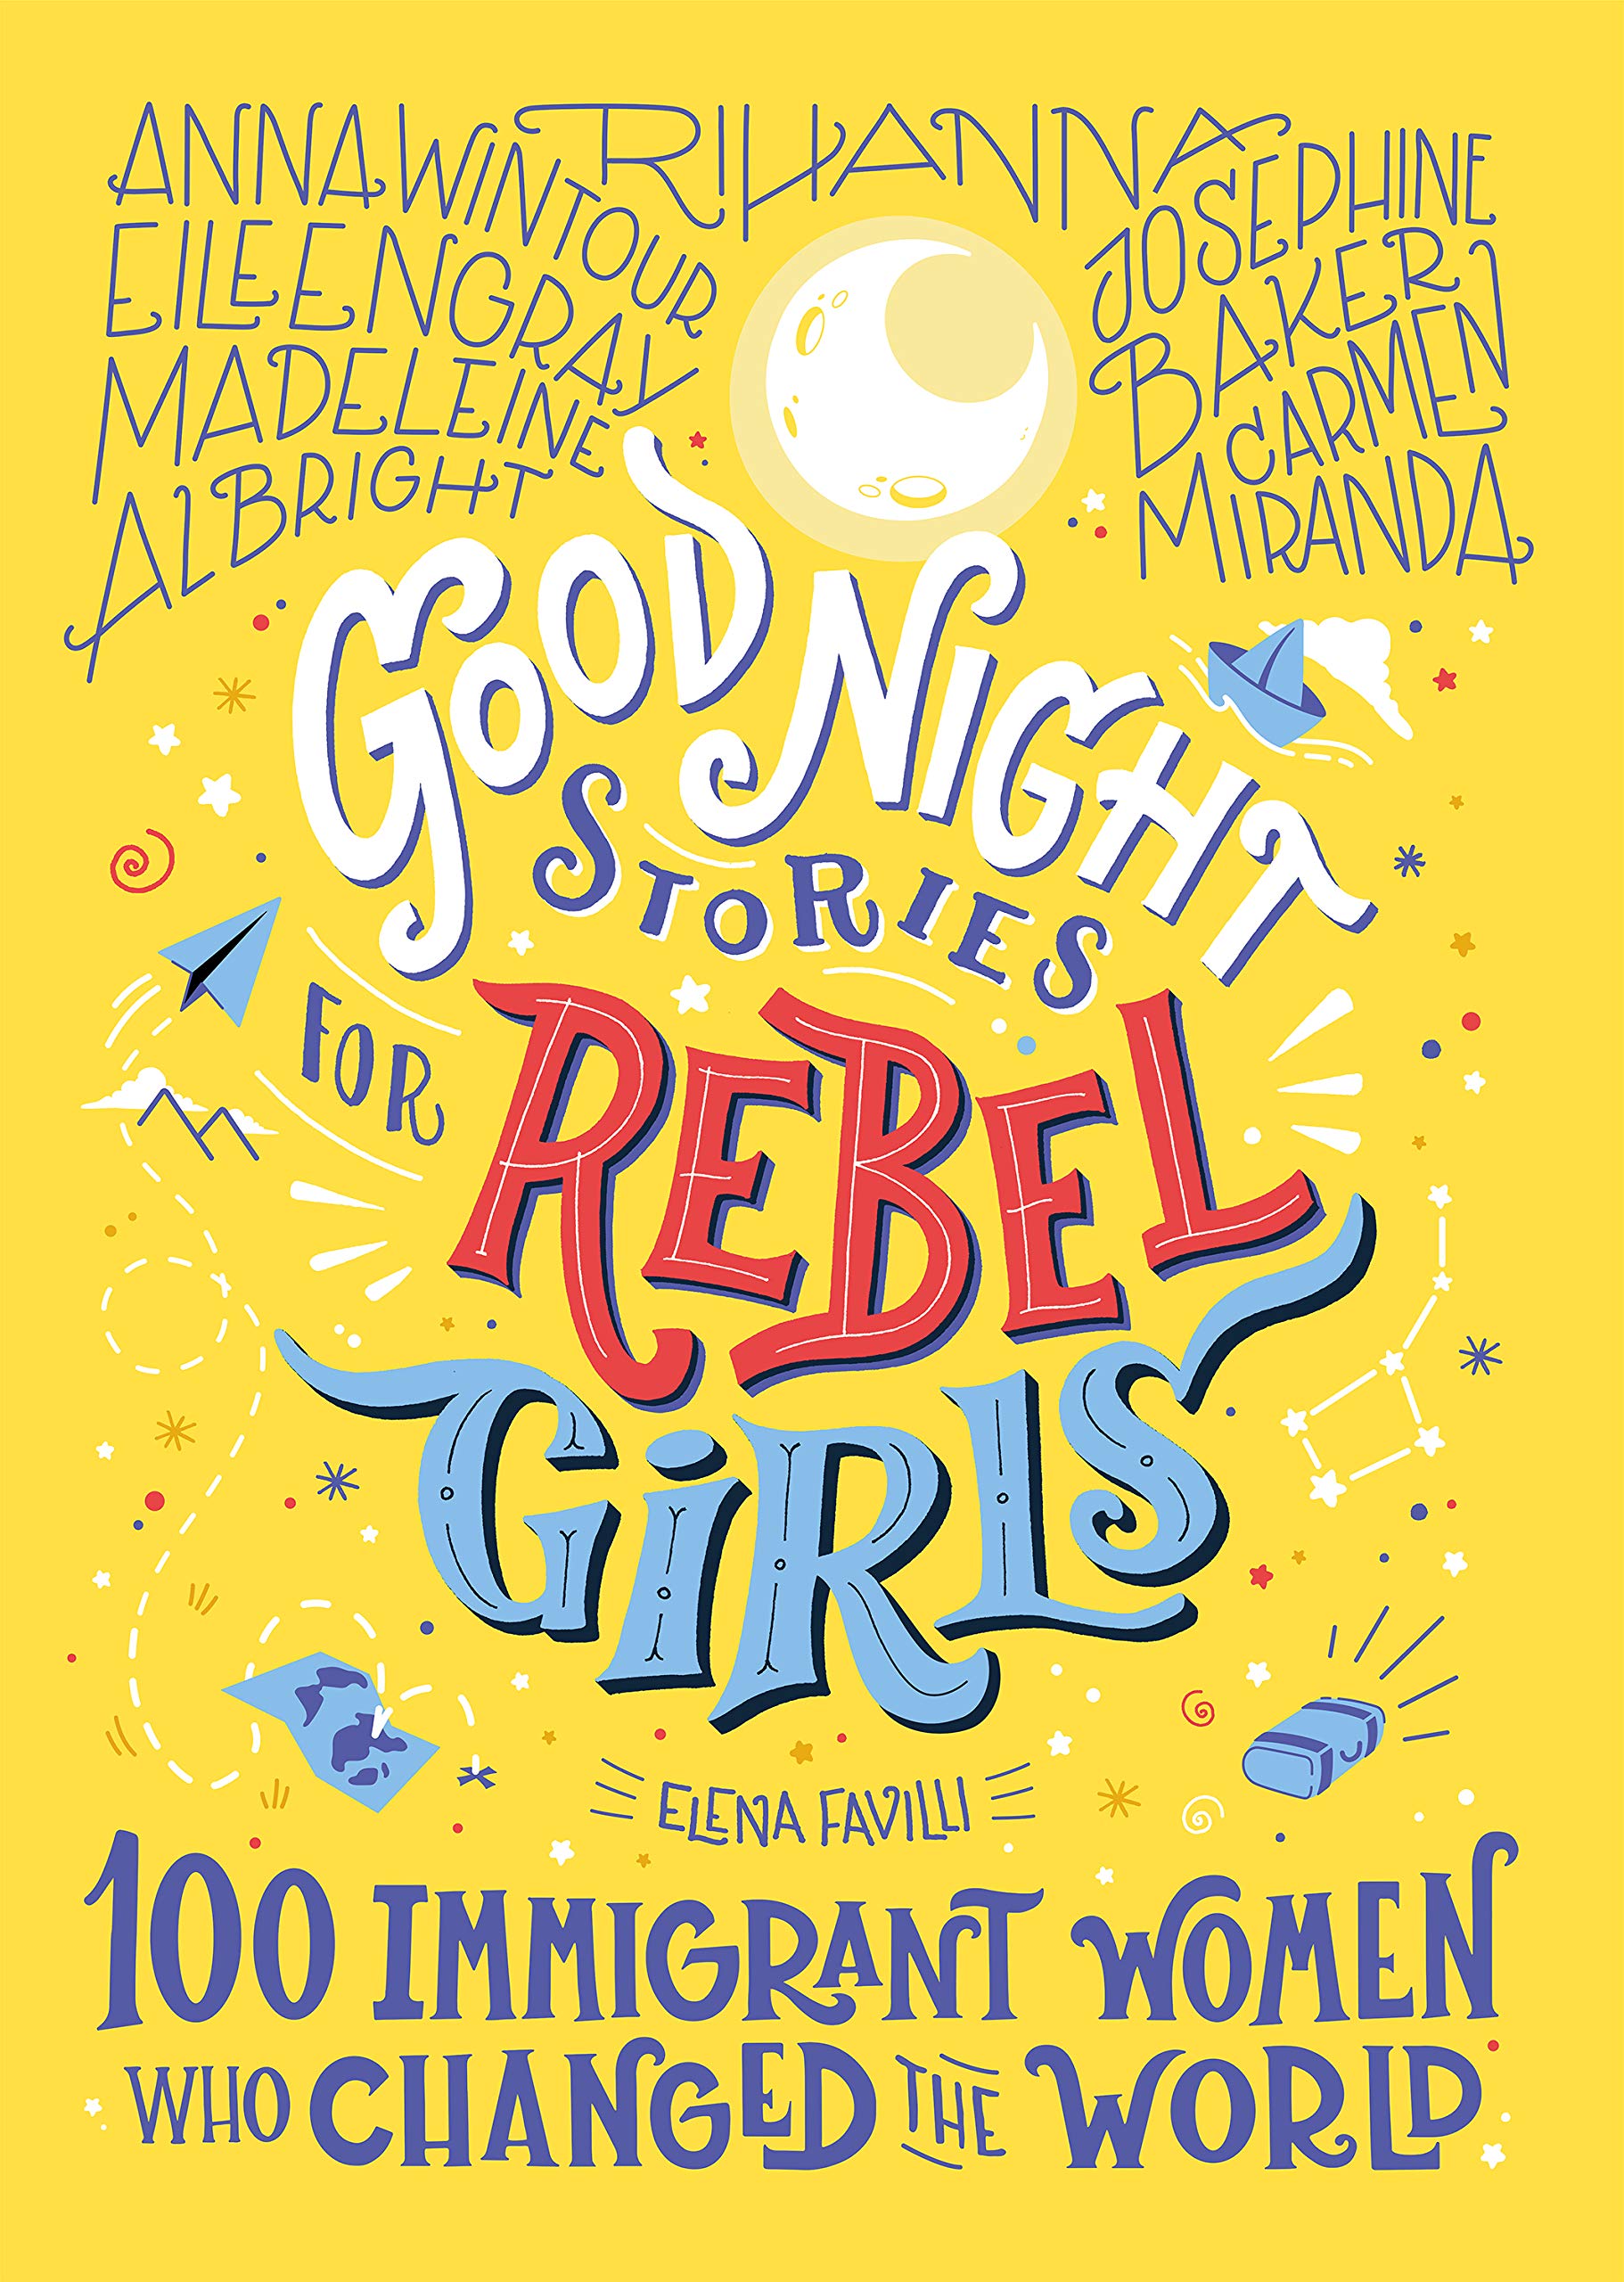 Good Night Stories For Rebel Girls: 100 Immigrant Women Who Changed The World | Elena Favilli